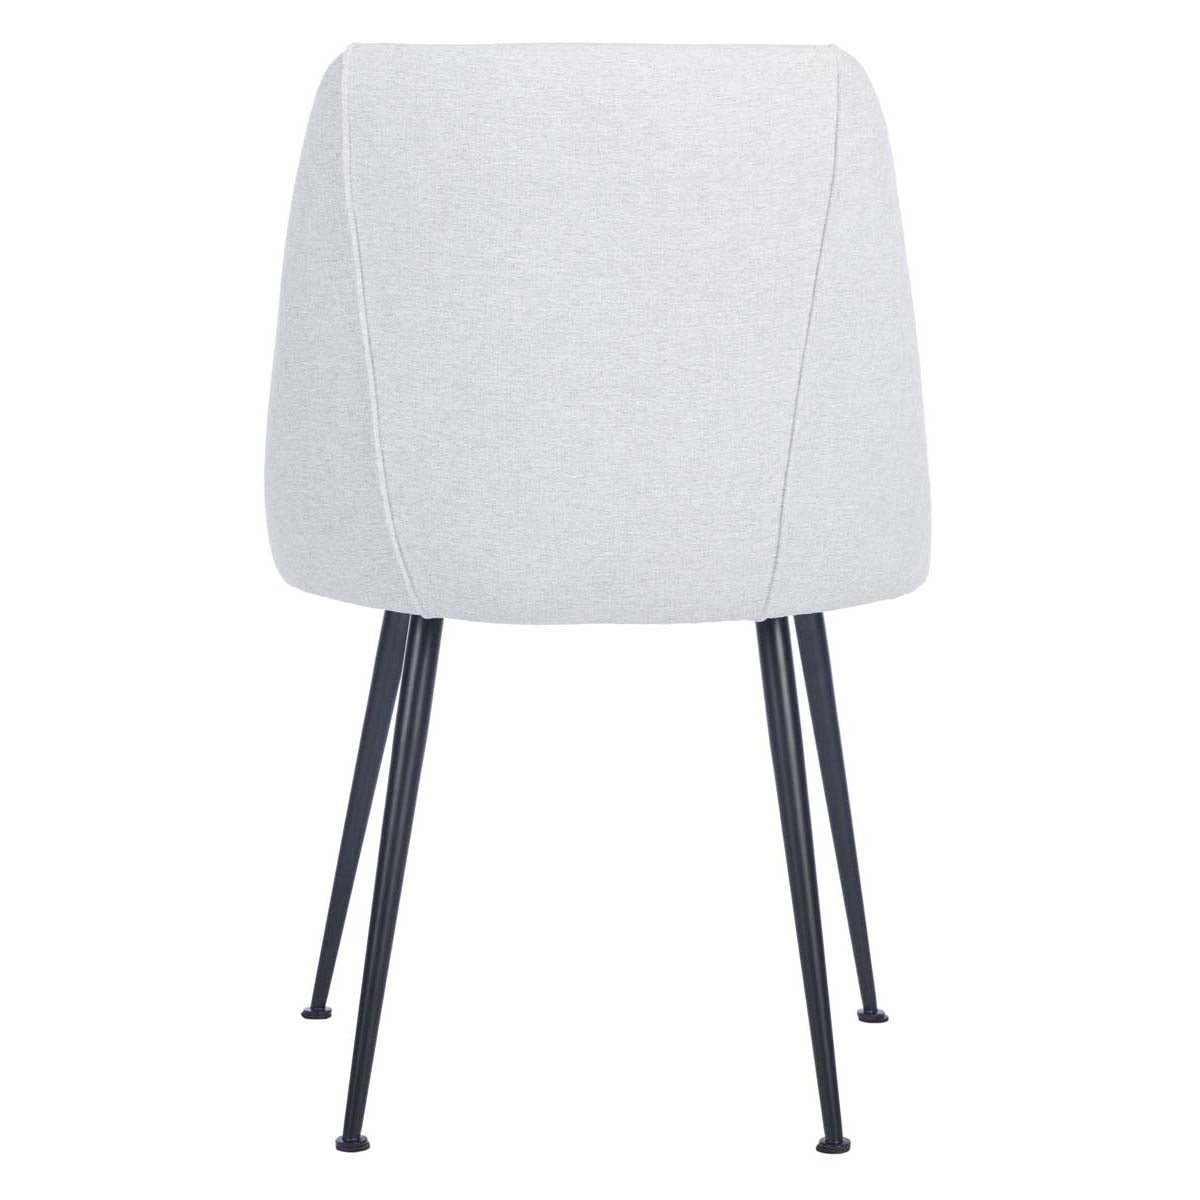 Safavieh Couture Foster Poly Blend Dining Chair - Grey / Black